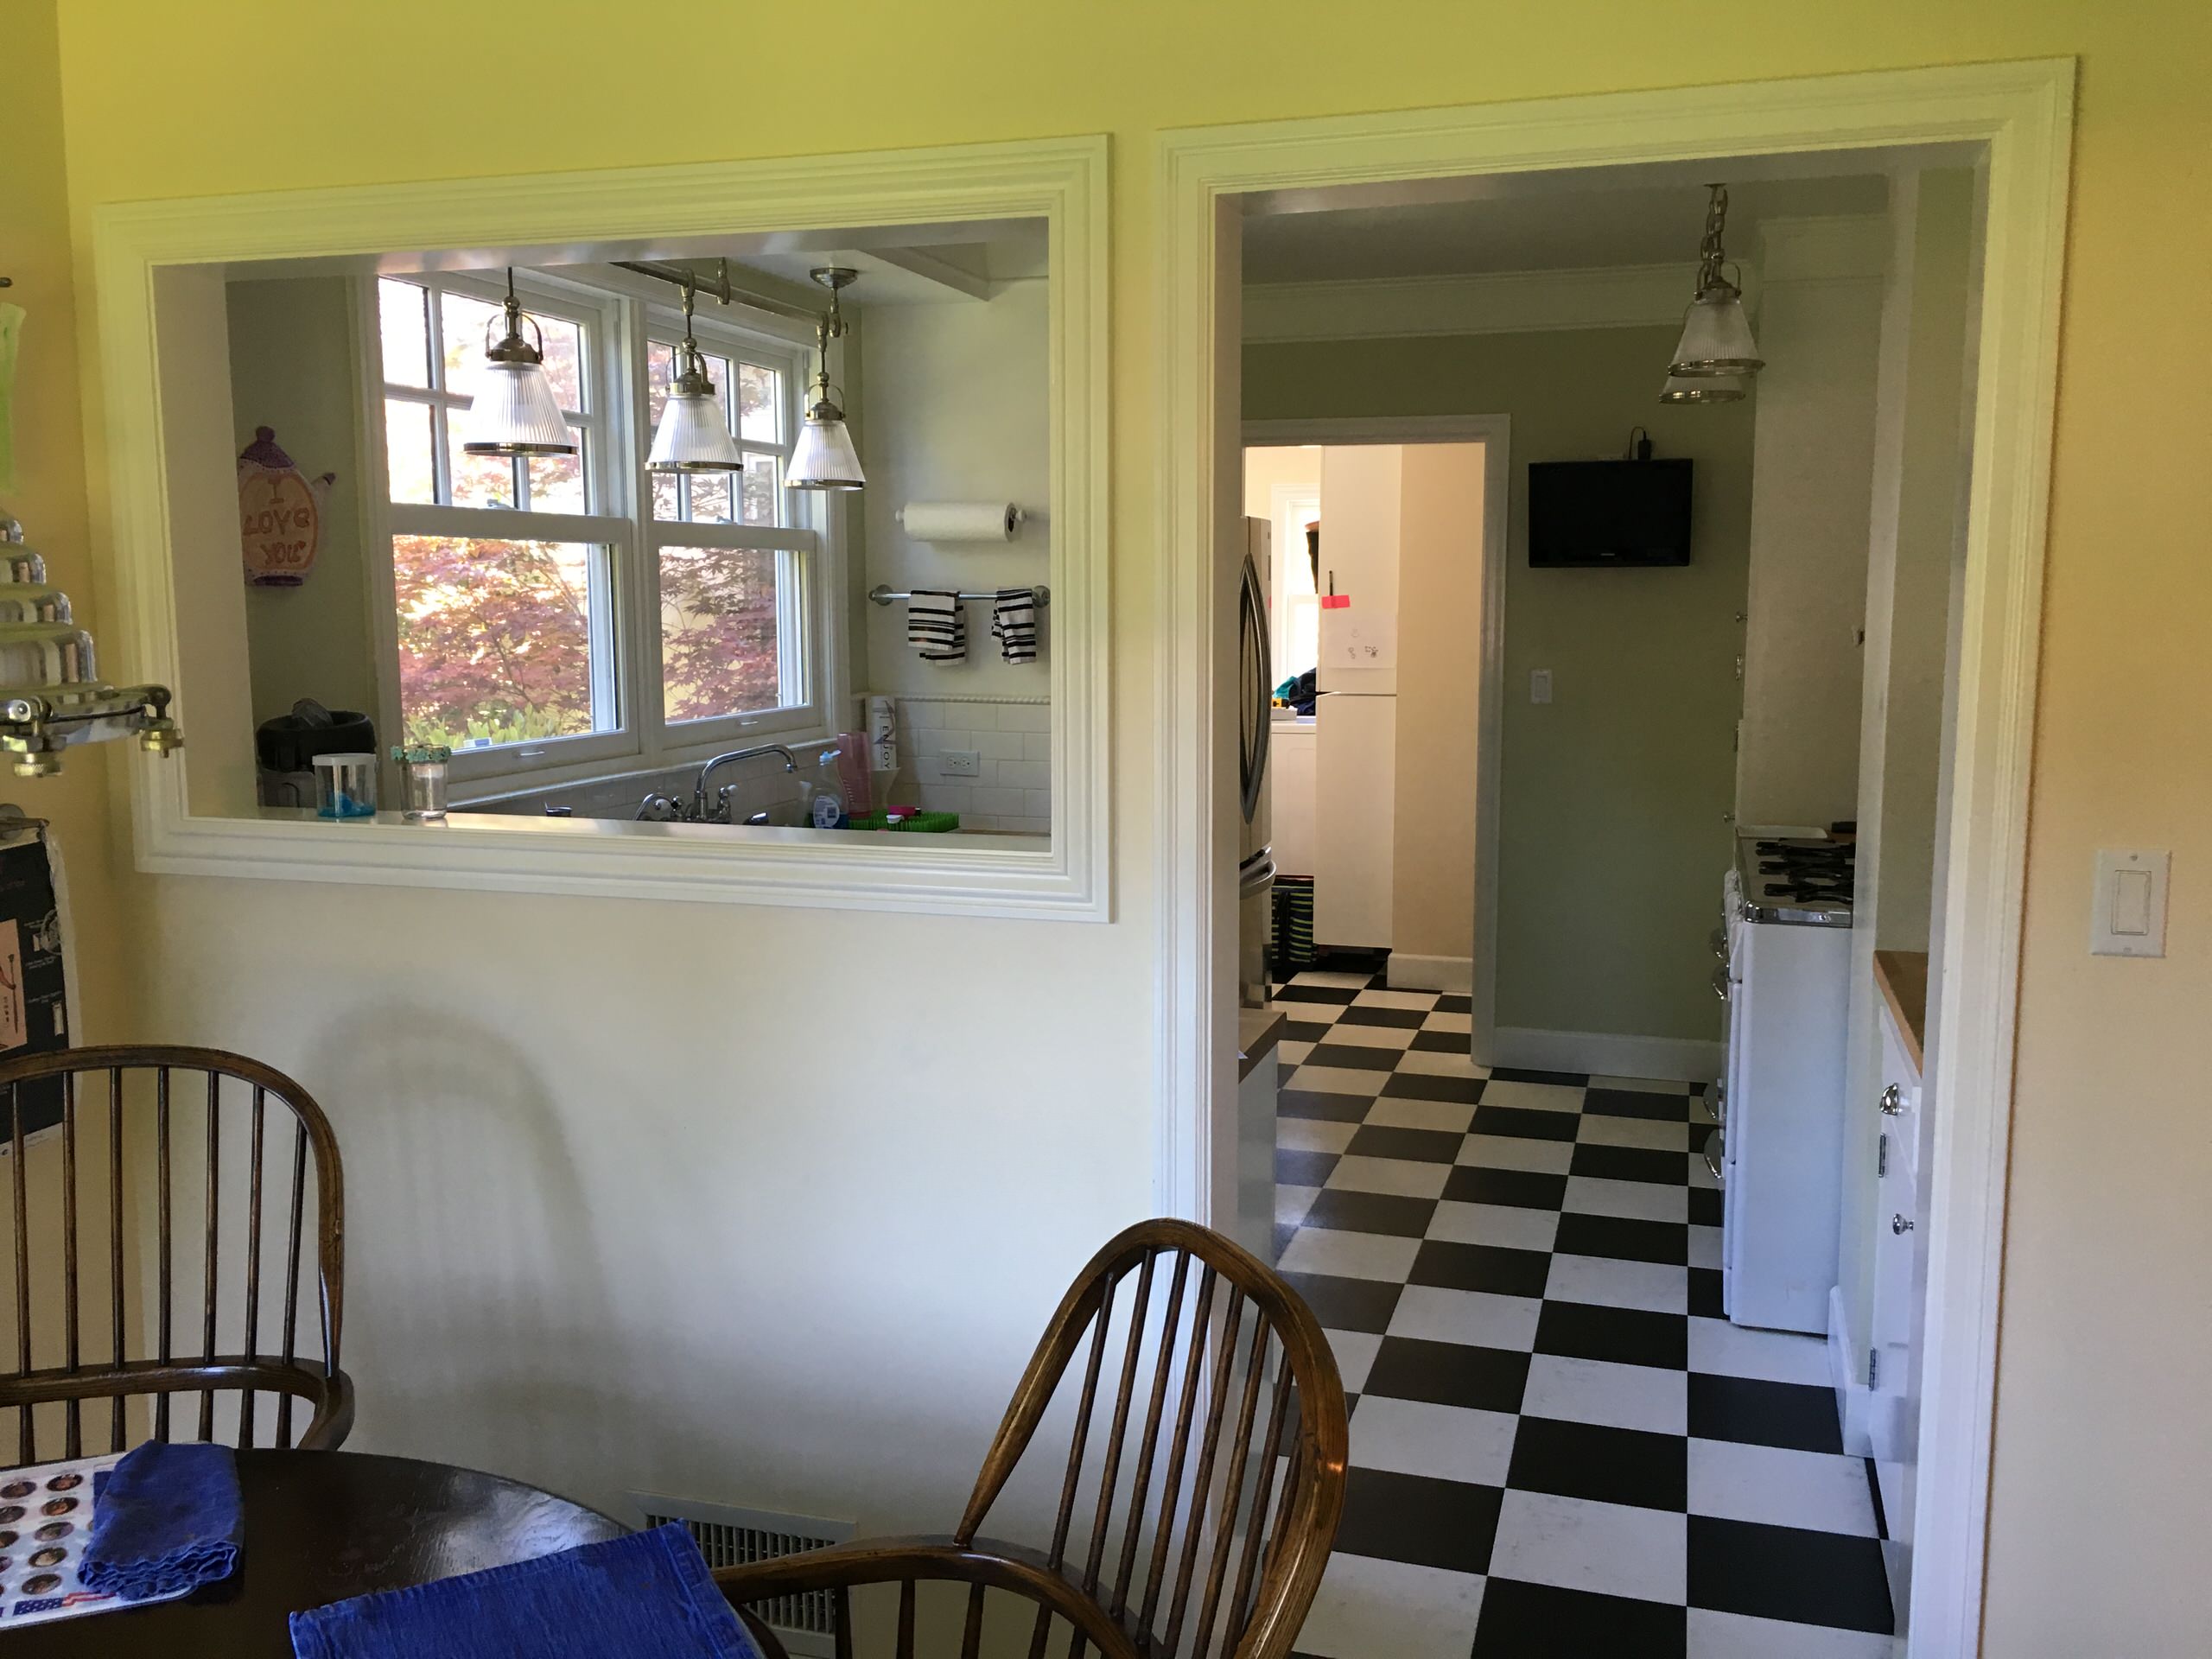 Colonial Revival - kitchen & office Before pictures